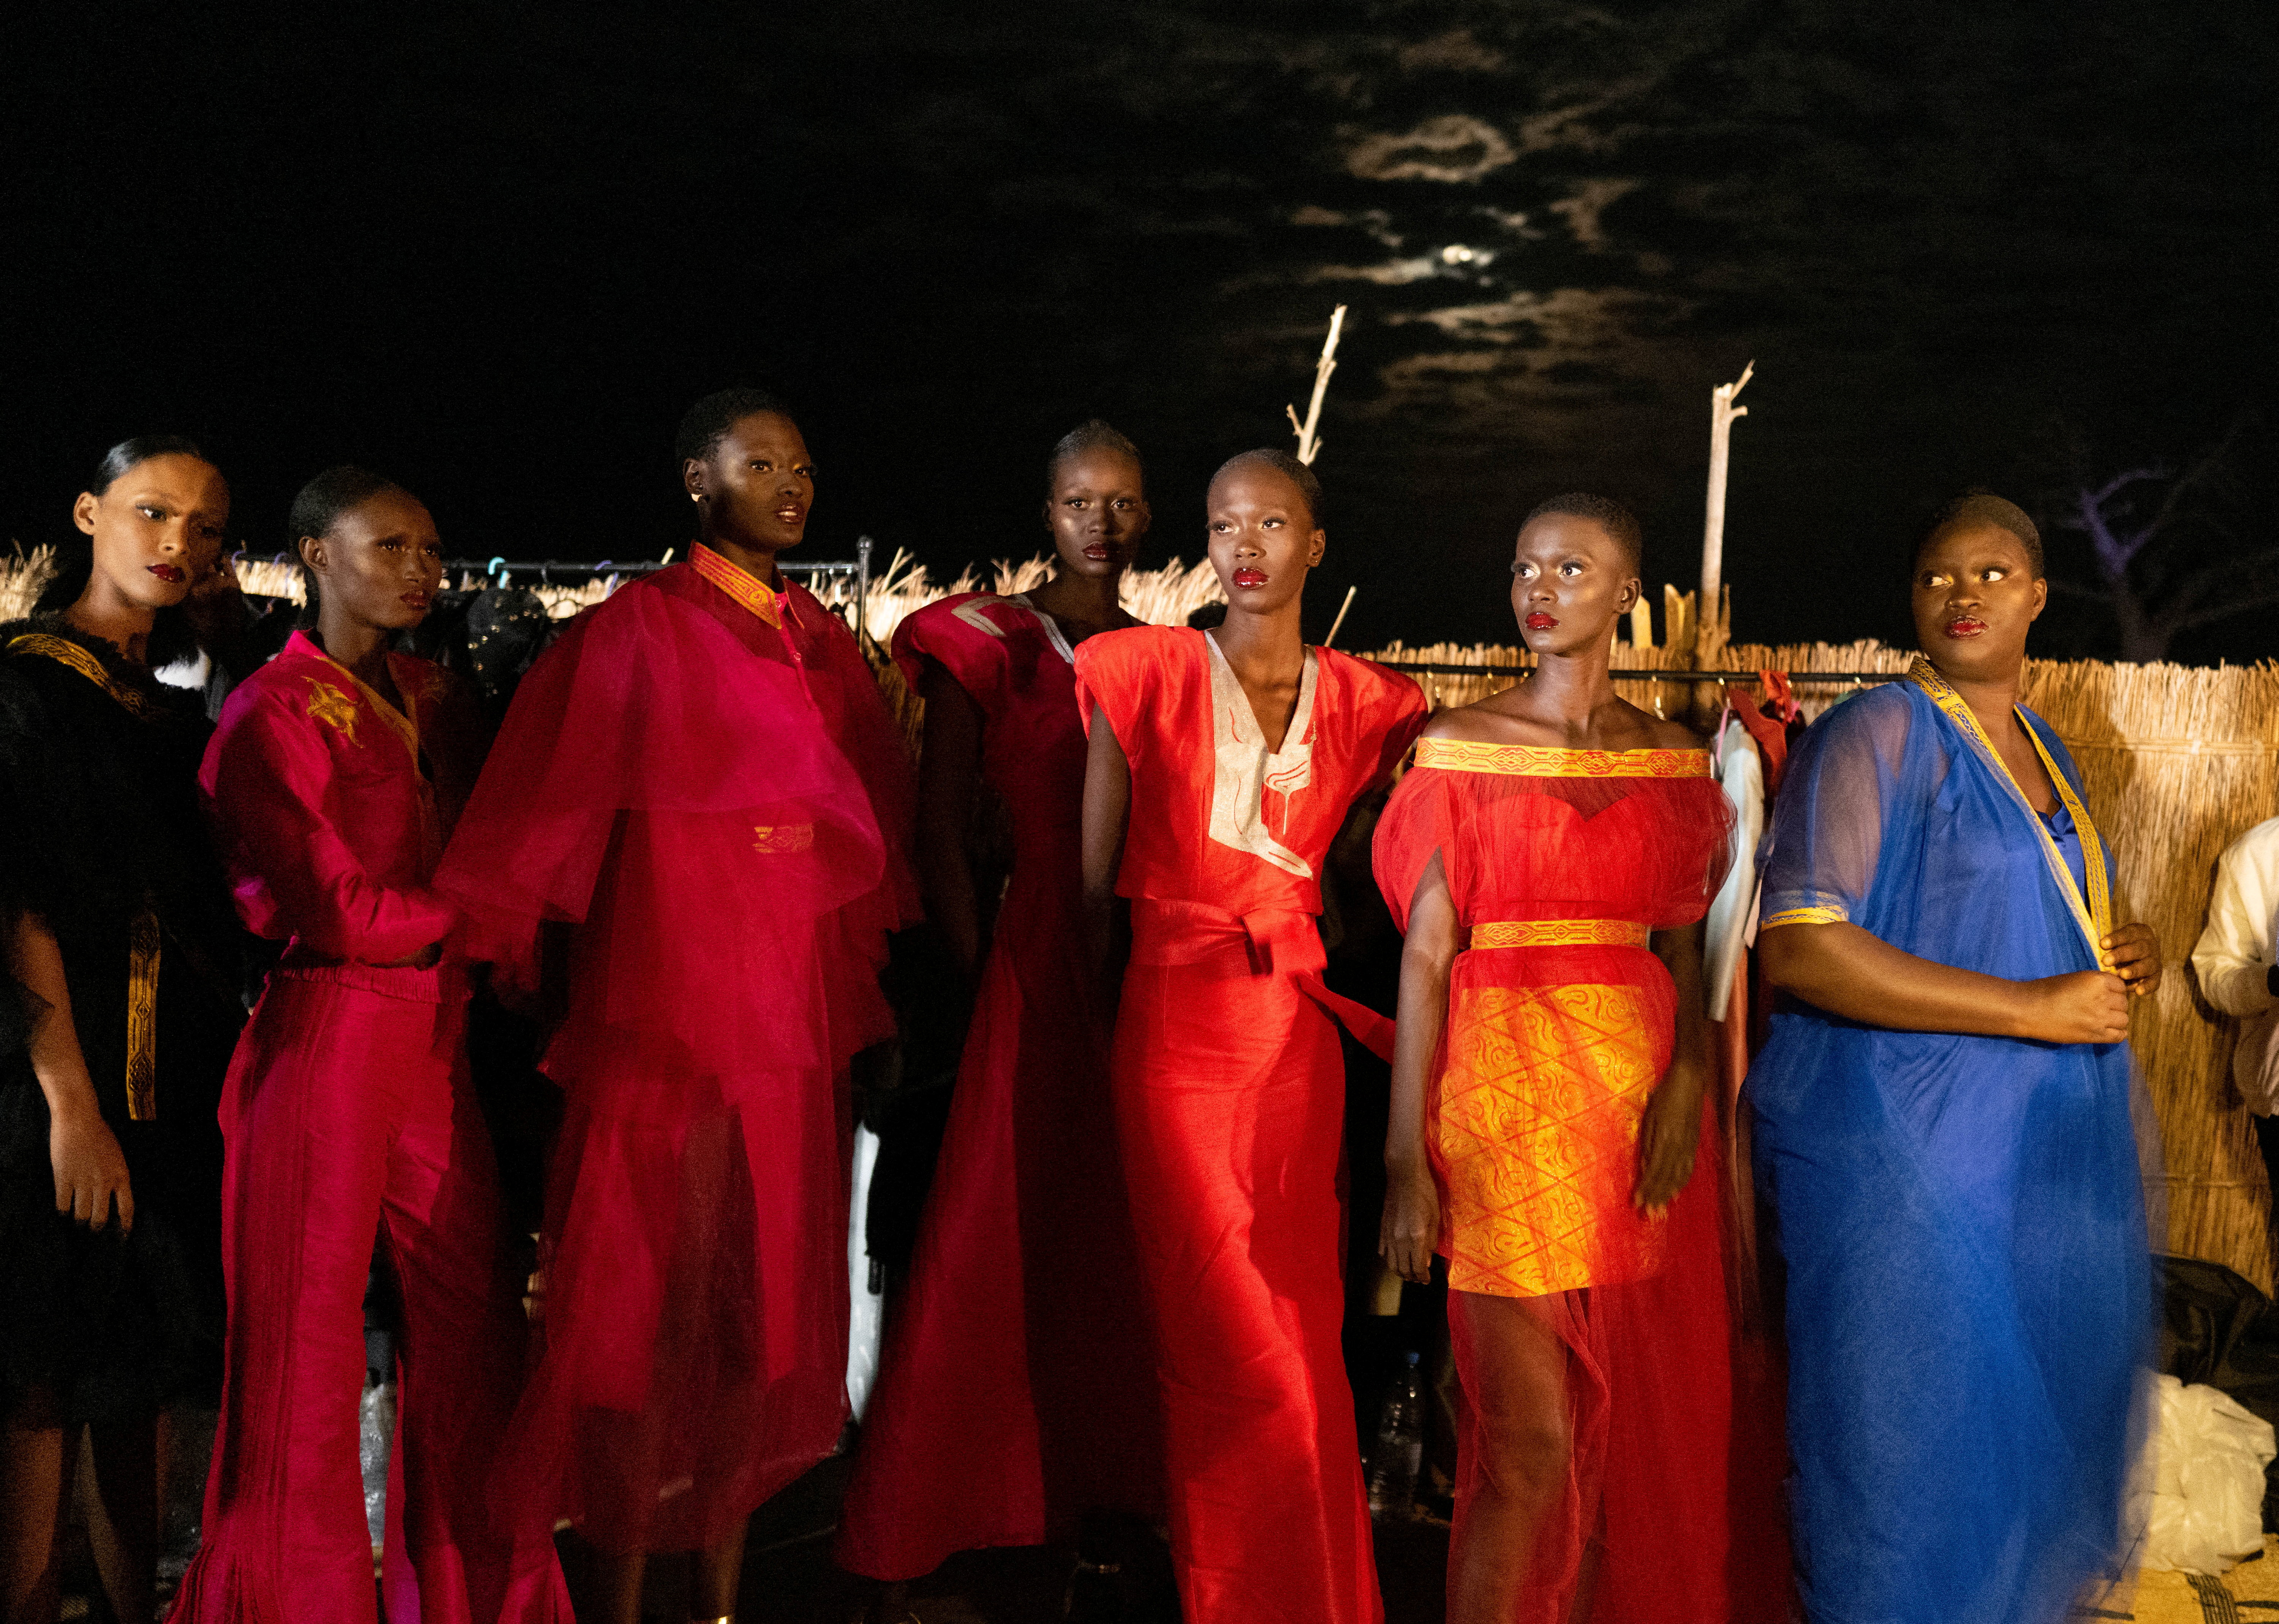 Models wait backstage during the 19th annual Dakar Fashion Week, at the Baobad forest,  in Mbour